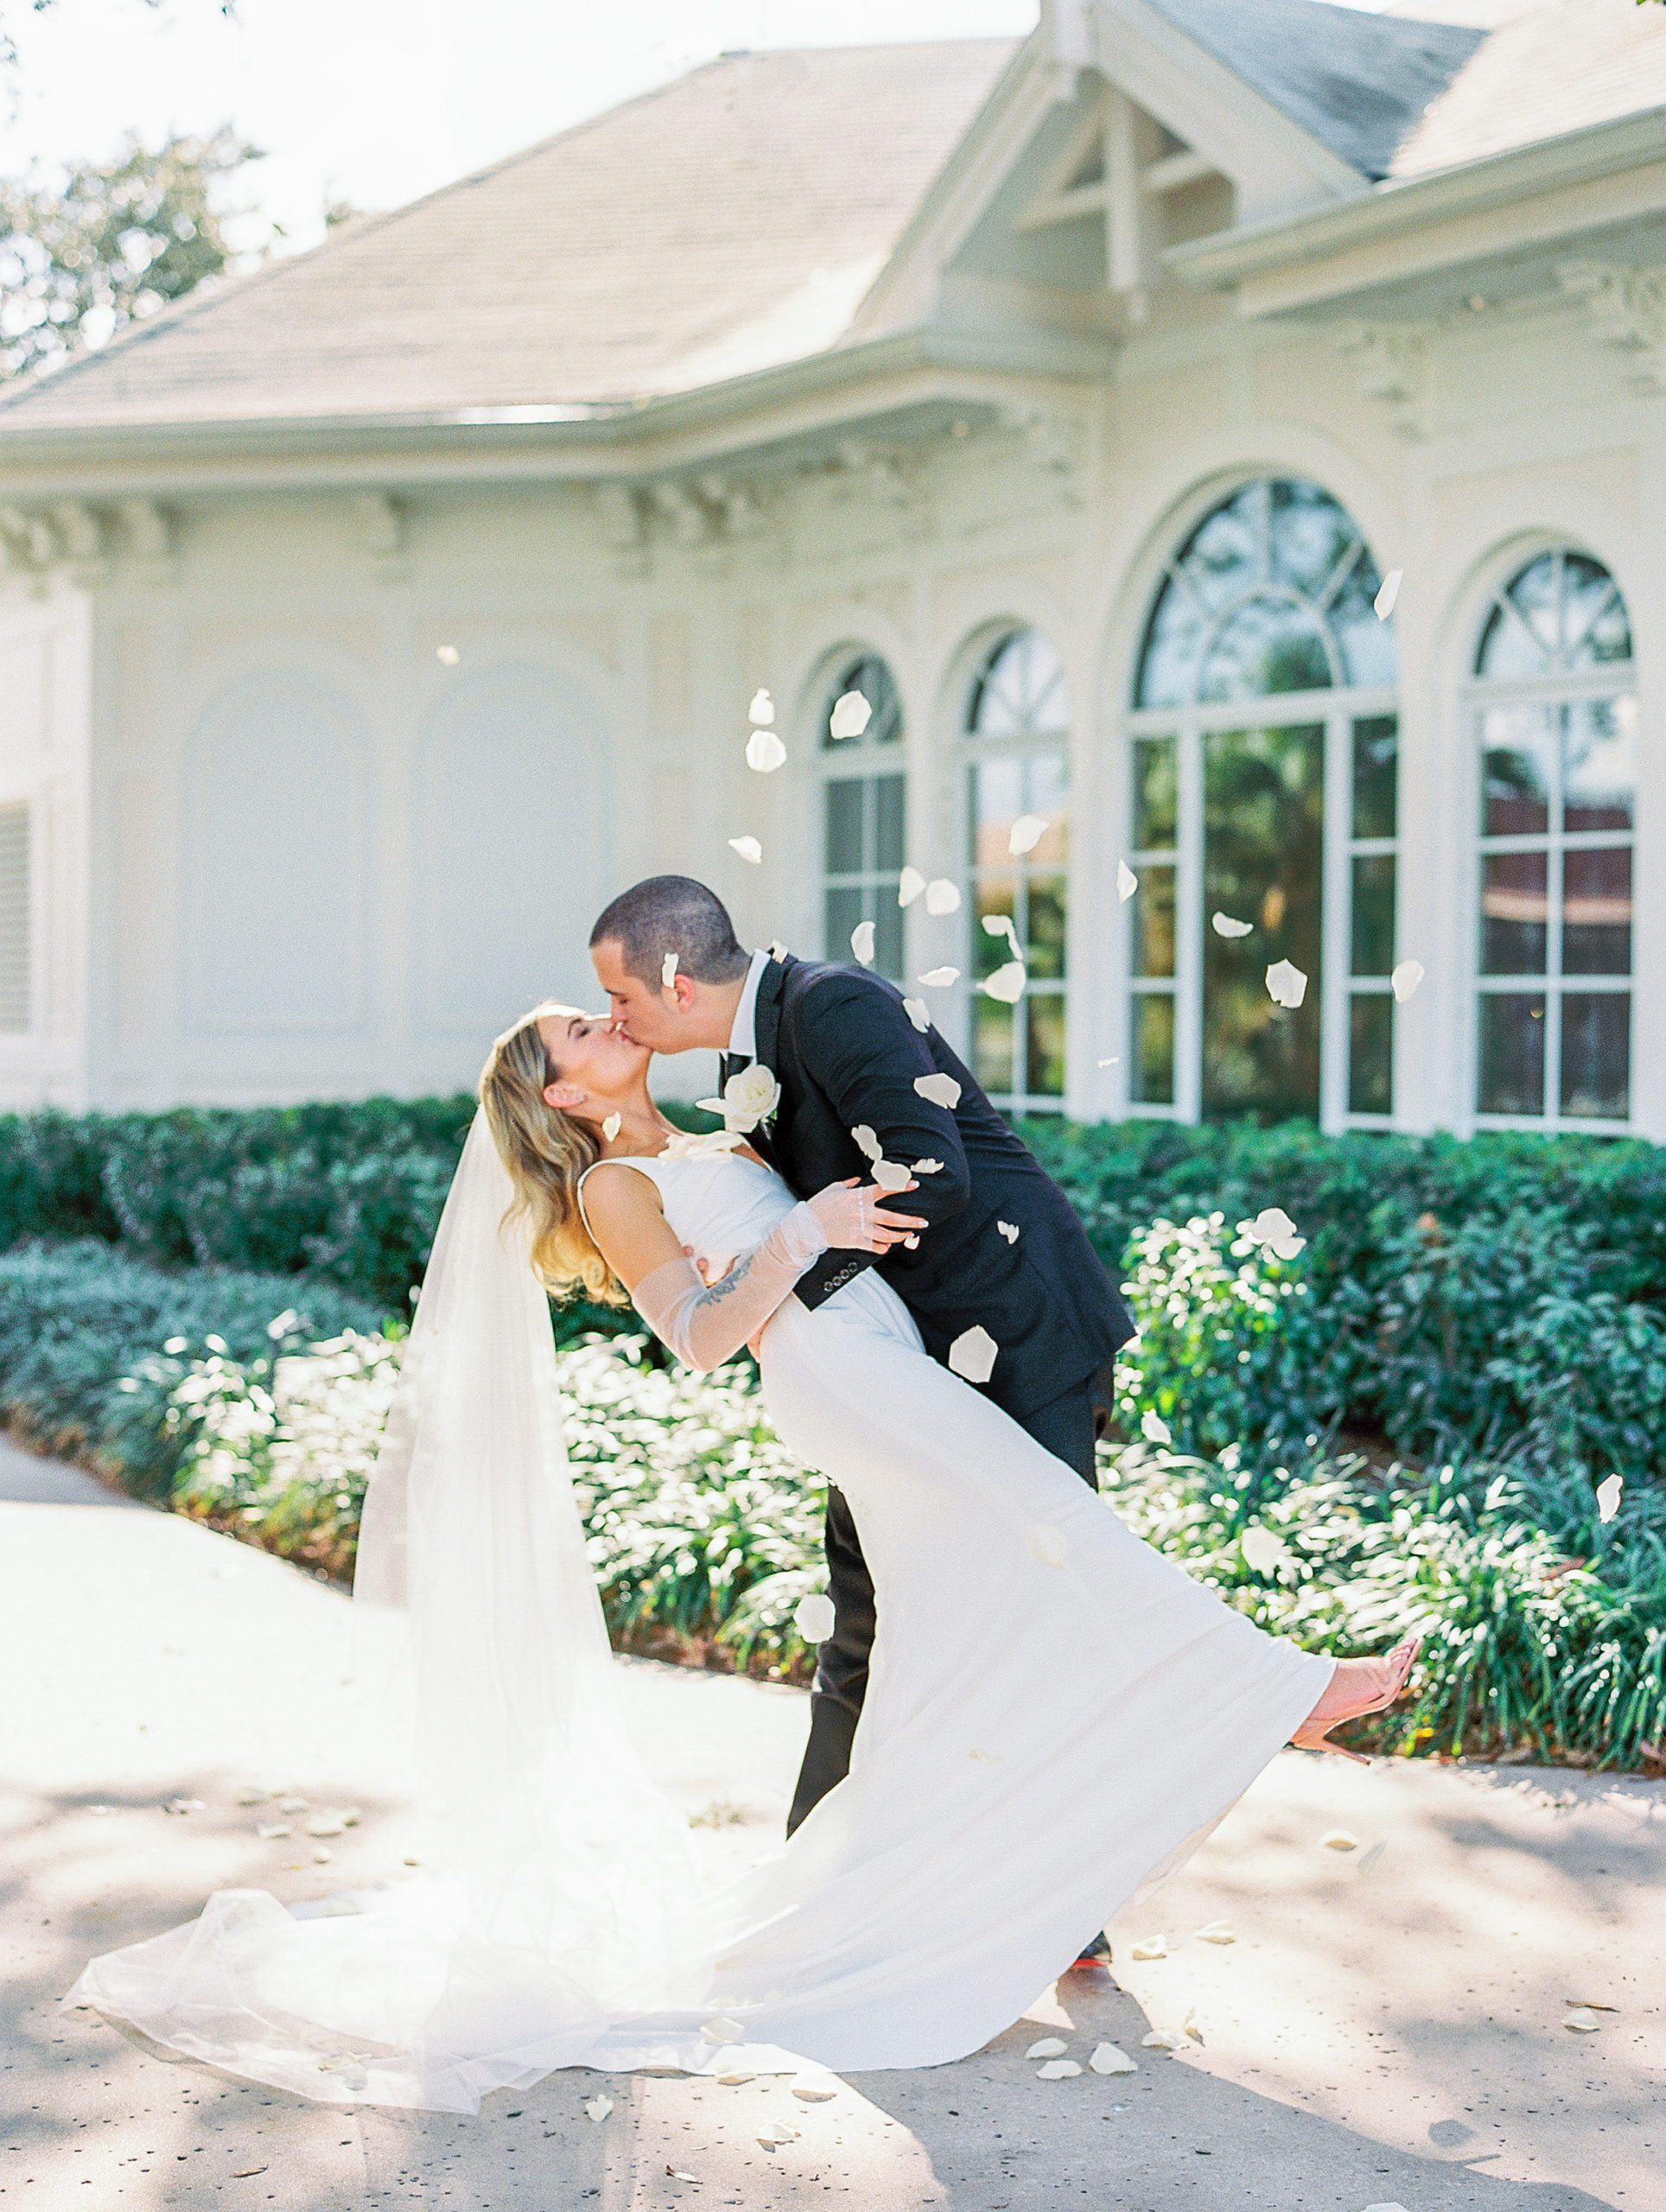 Groom dips bride and kisses her as white rose petals fall over them for Disney Film Wedding Photographer